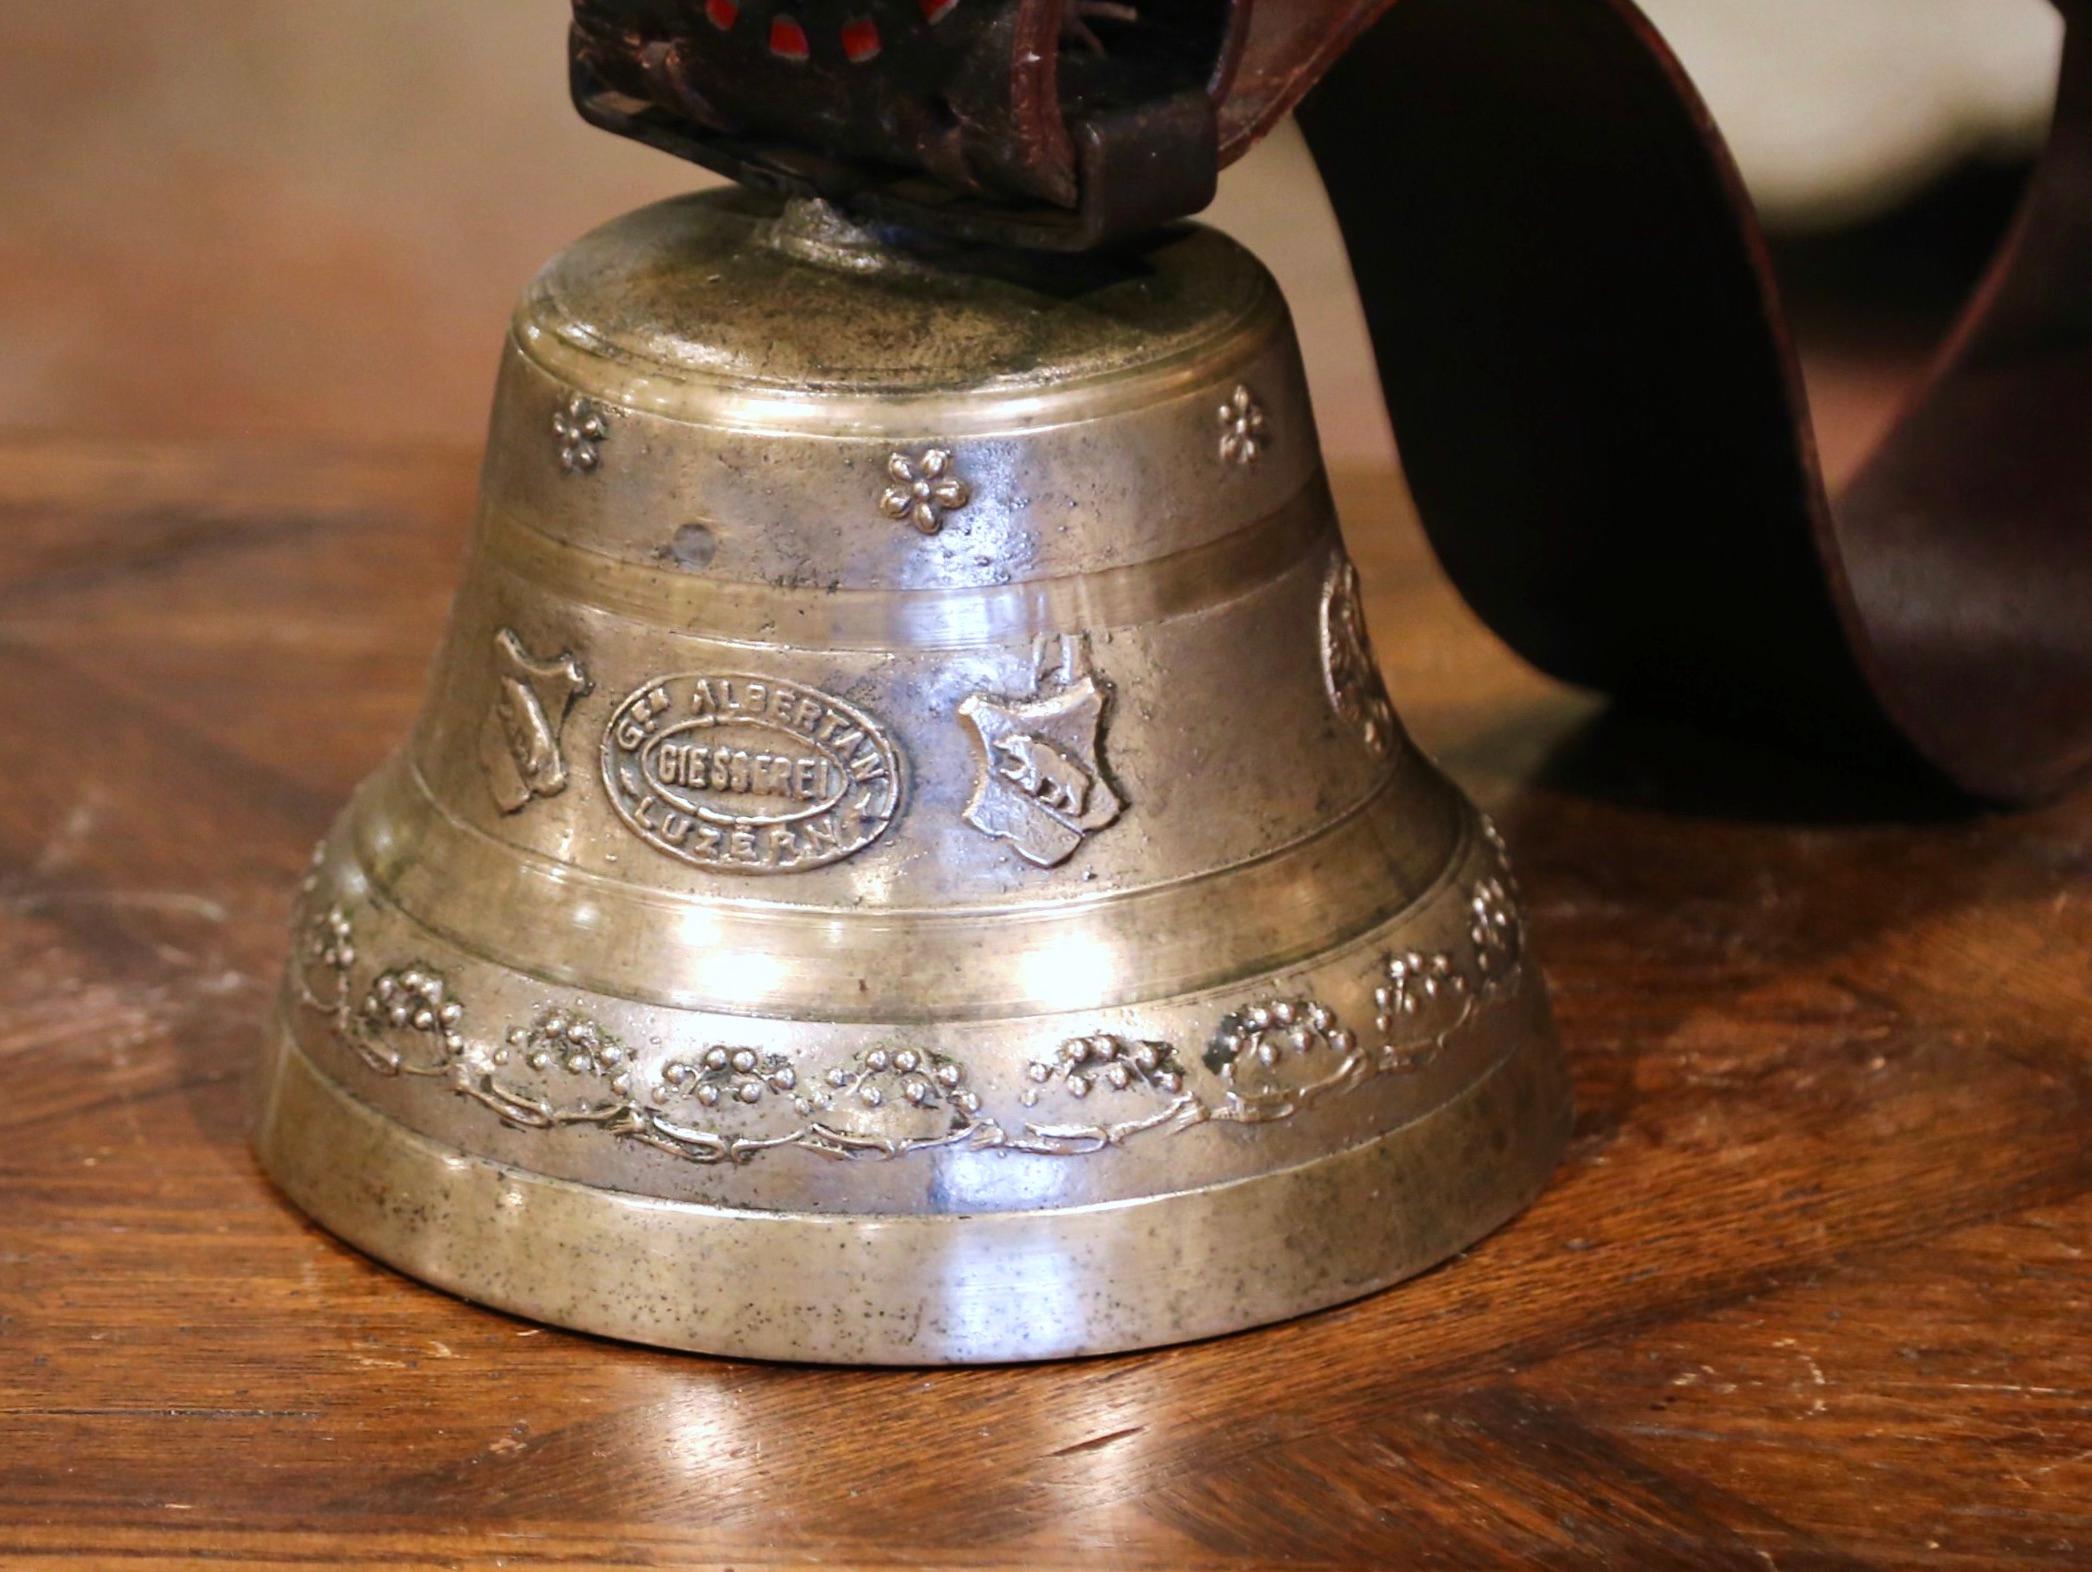 Bring the Swiss countryside into your home with this large antique bell and collar. Crafted by Giesserei, Luzerne, Switzerland circa 1880, the elegant bronze bell features several motifs in relief including floral medallions around the top, bear